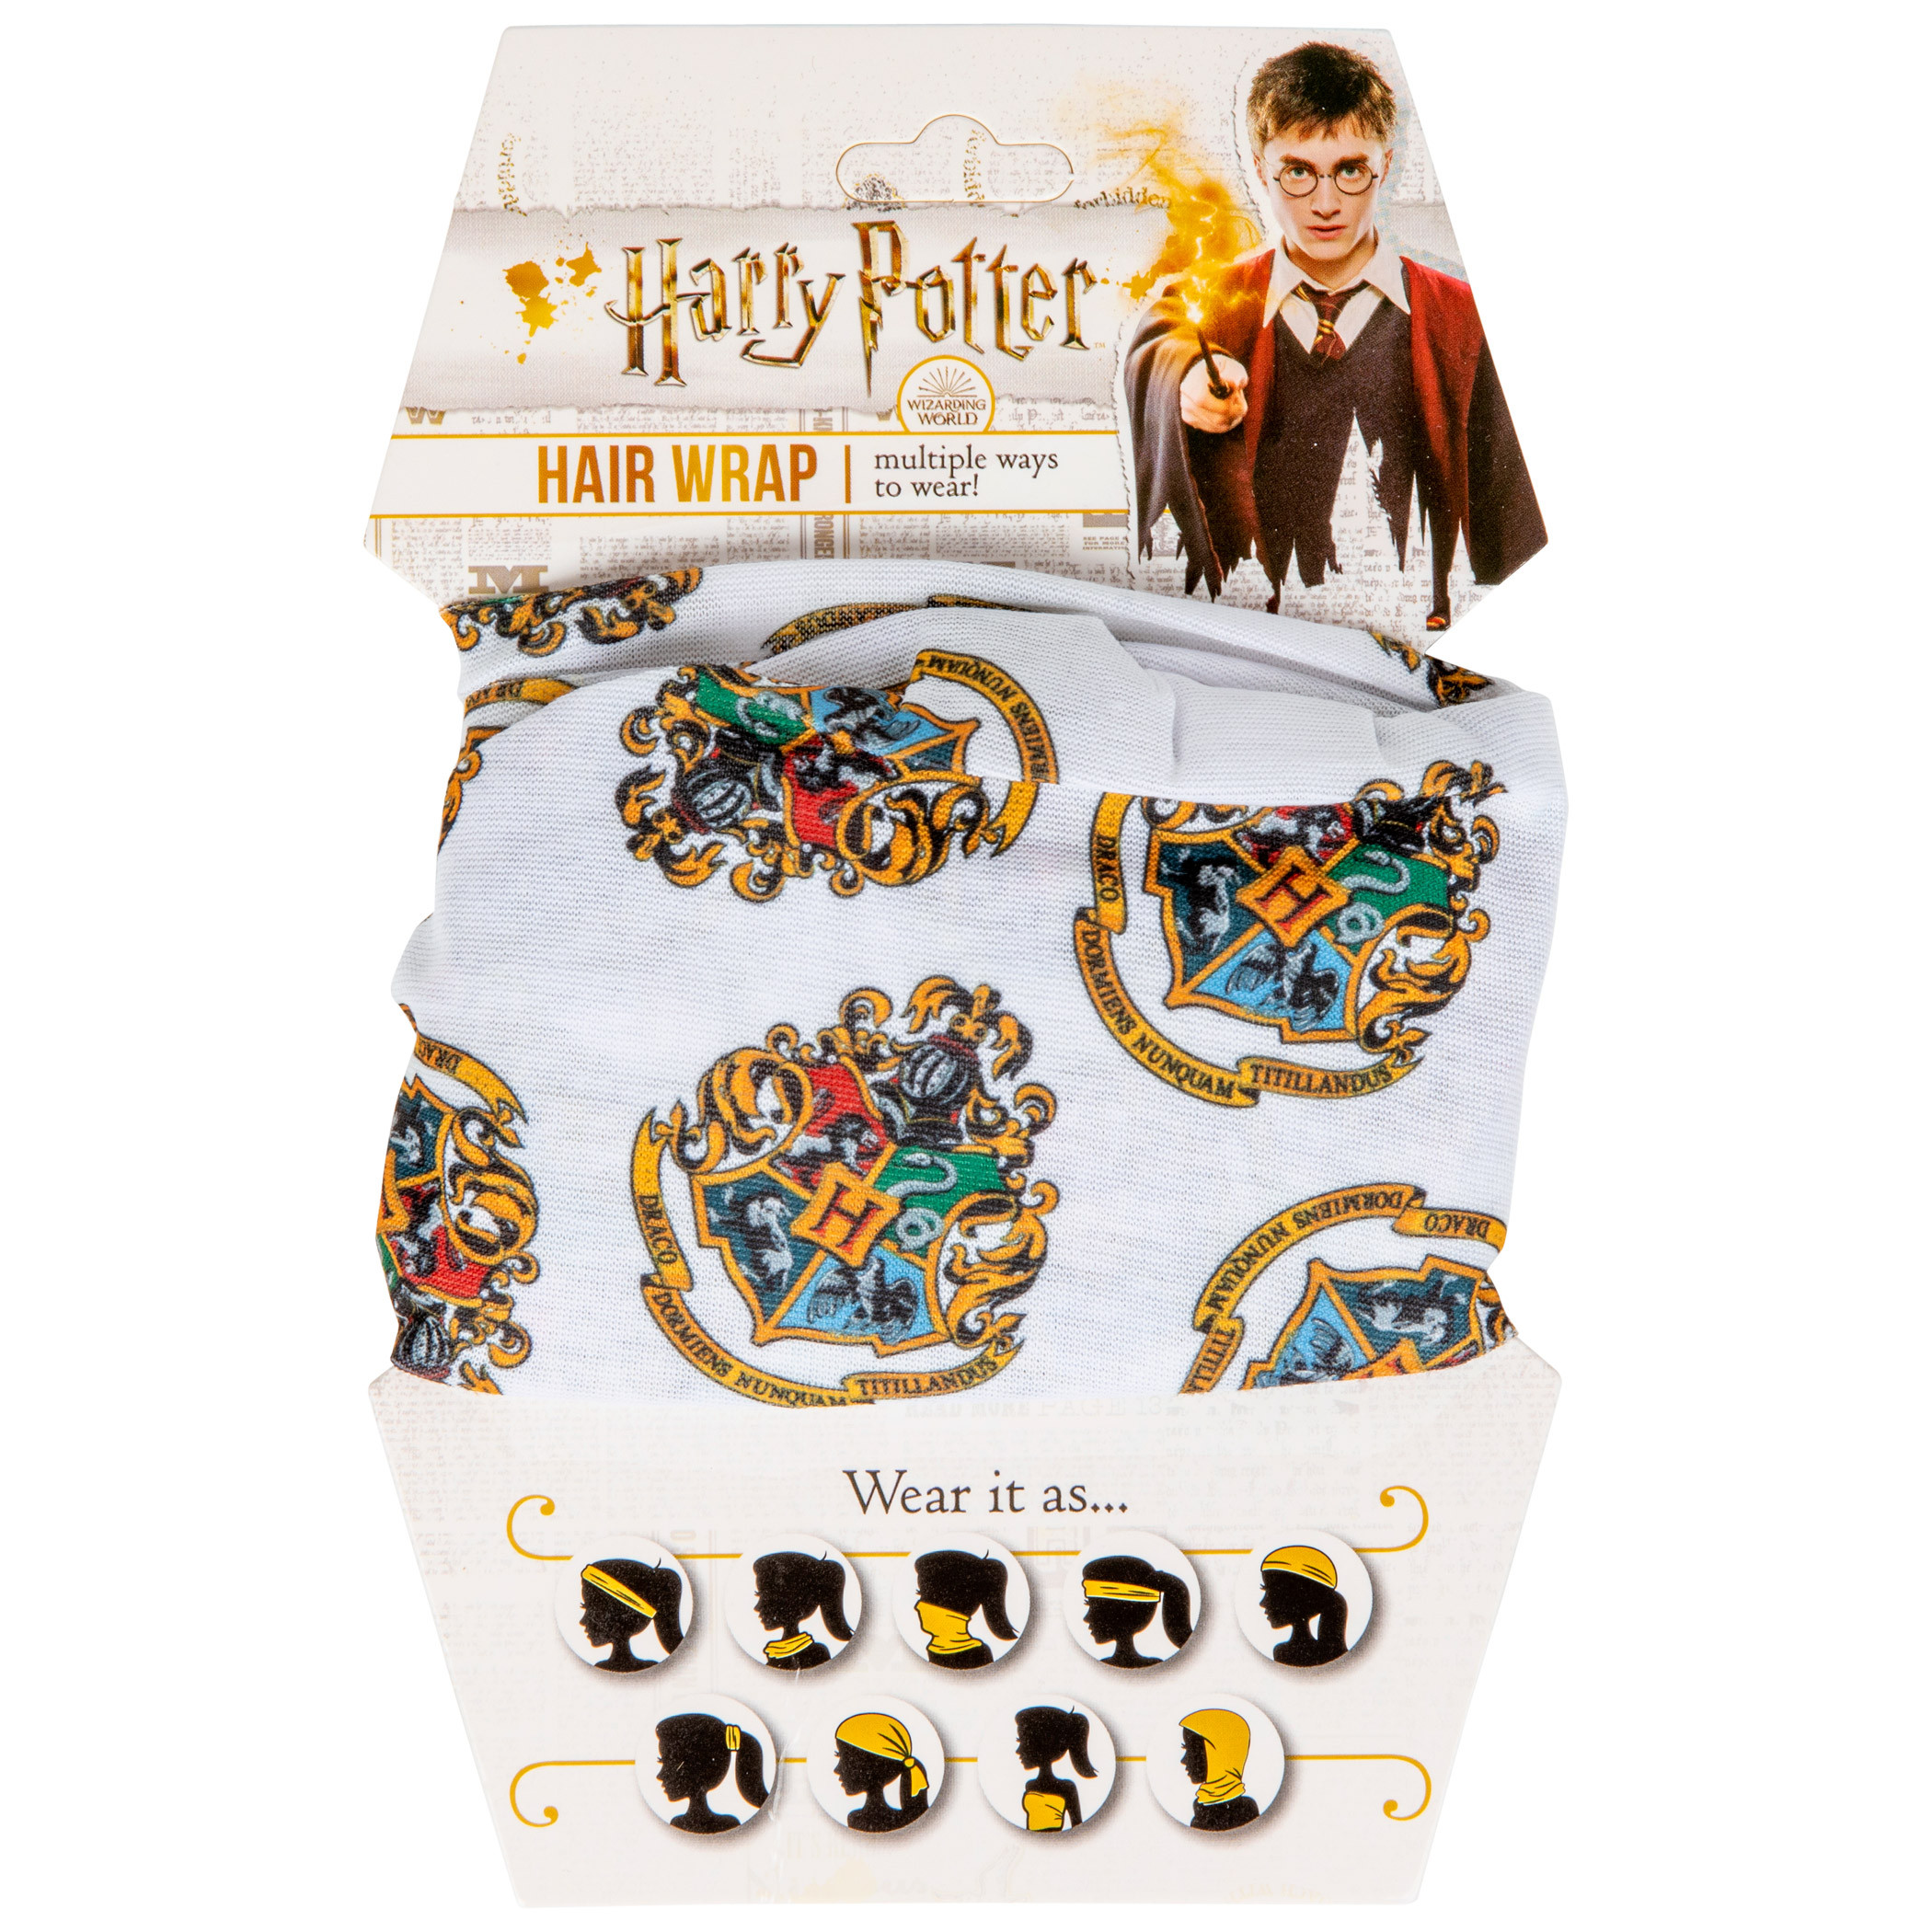 Harry Potter Hogwarts Face Mask and Hair Wrap